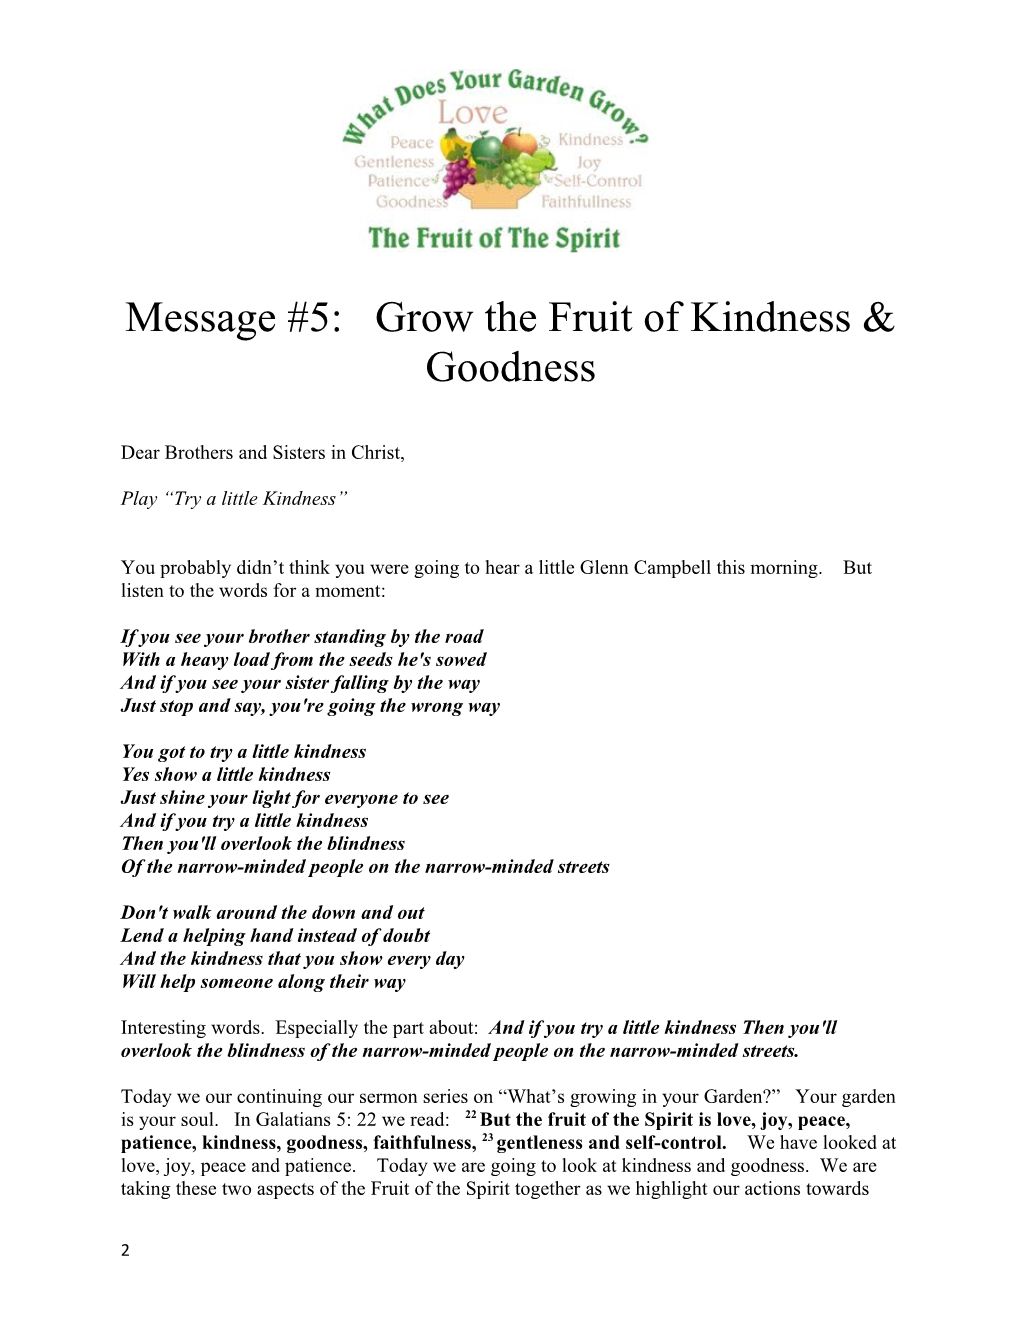 Message #5: Grow the Fruit of Kindness & Goodness